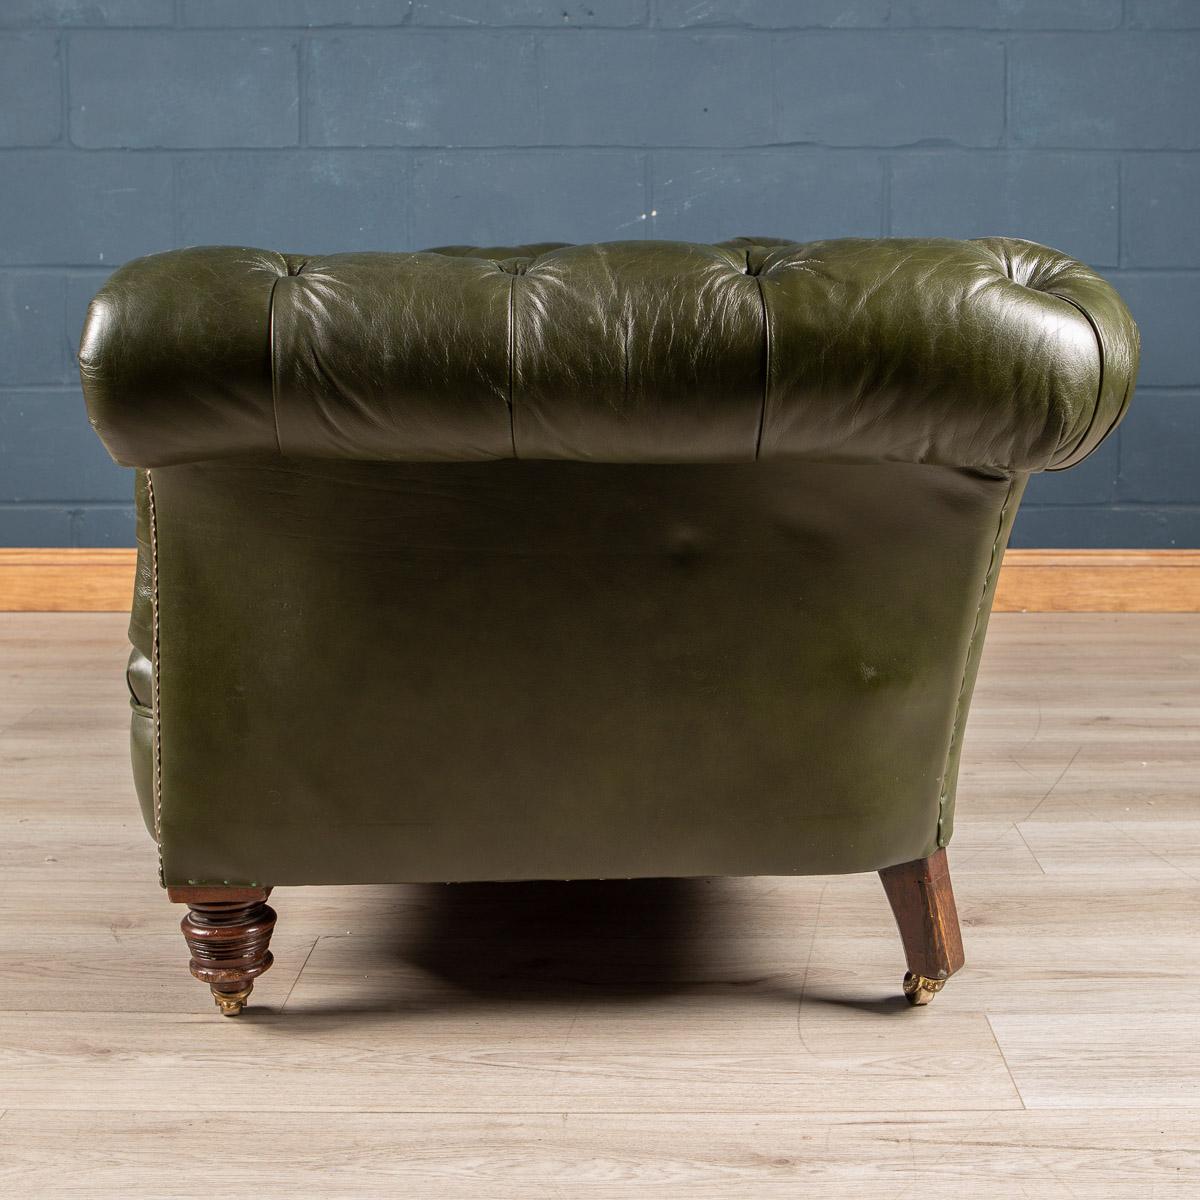 English 20th Century Victorian Green Leather Chesterfield Sofa, c.1900